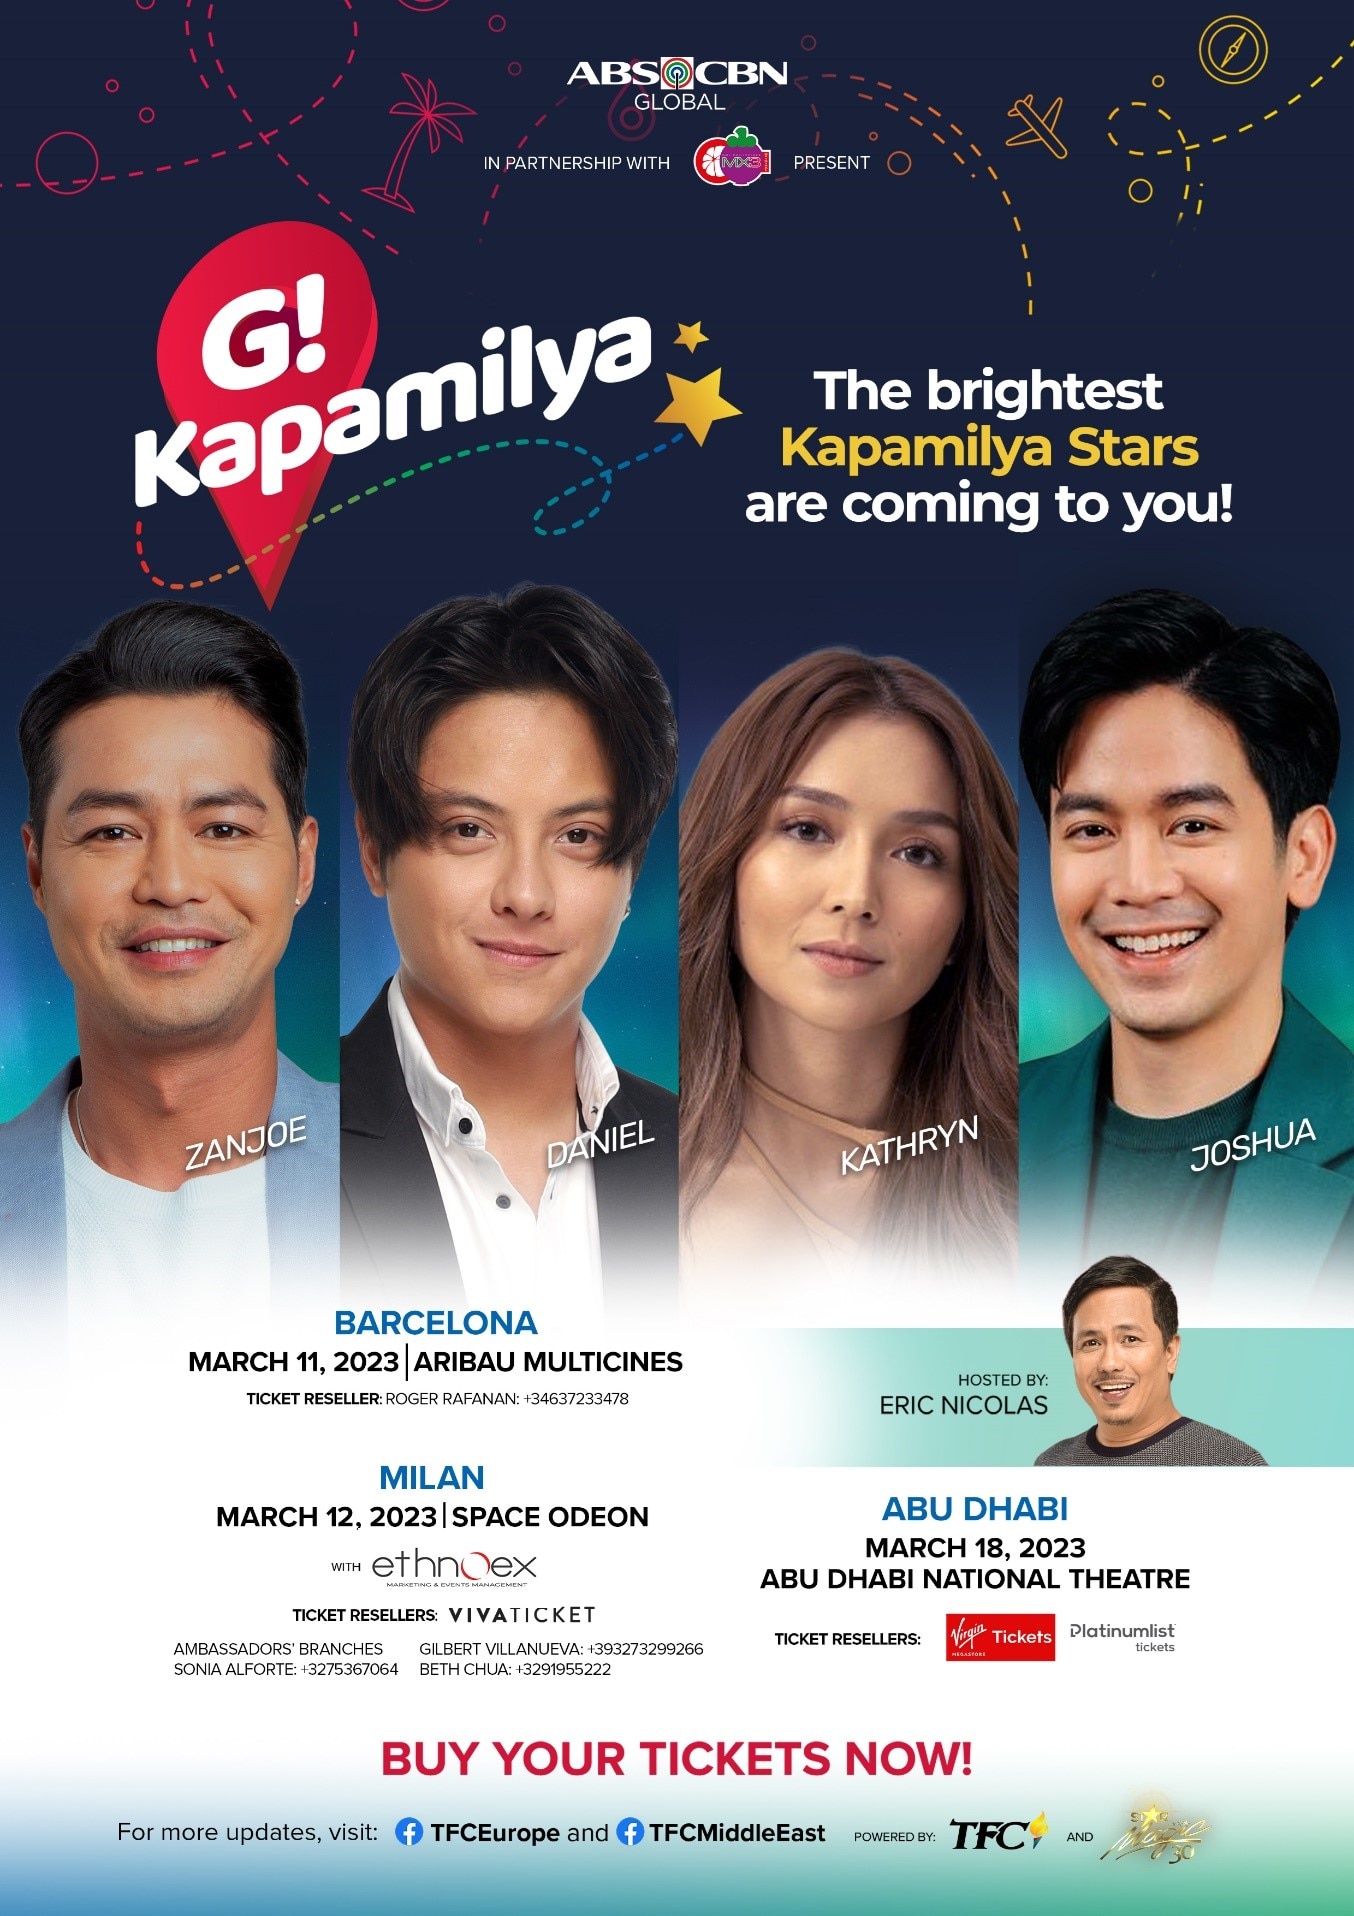 G! Kapamilya Tour kicks off this March  in Europe and the Middle East  with Zanjoe, Daniel, Kathryn and Joshua